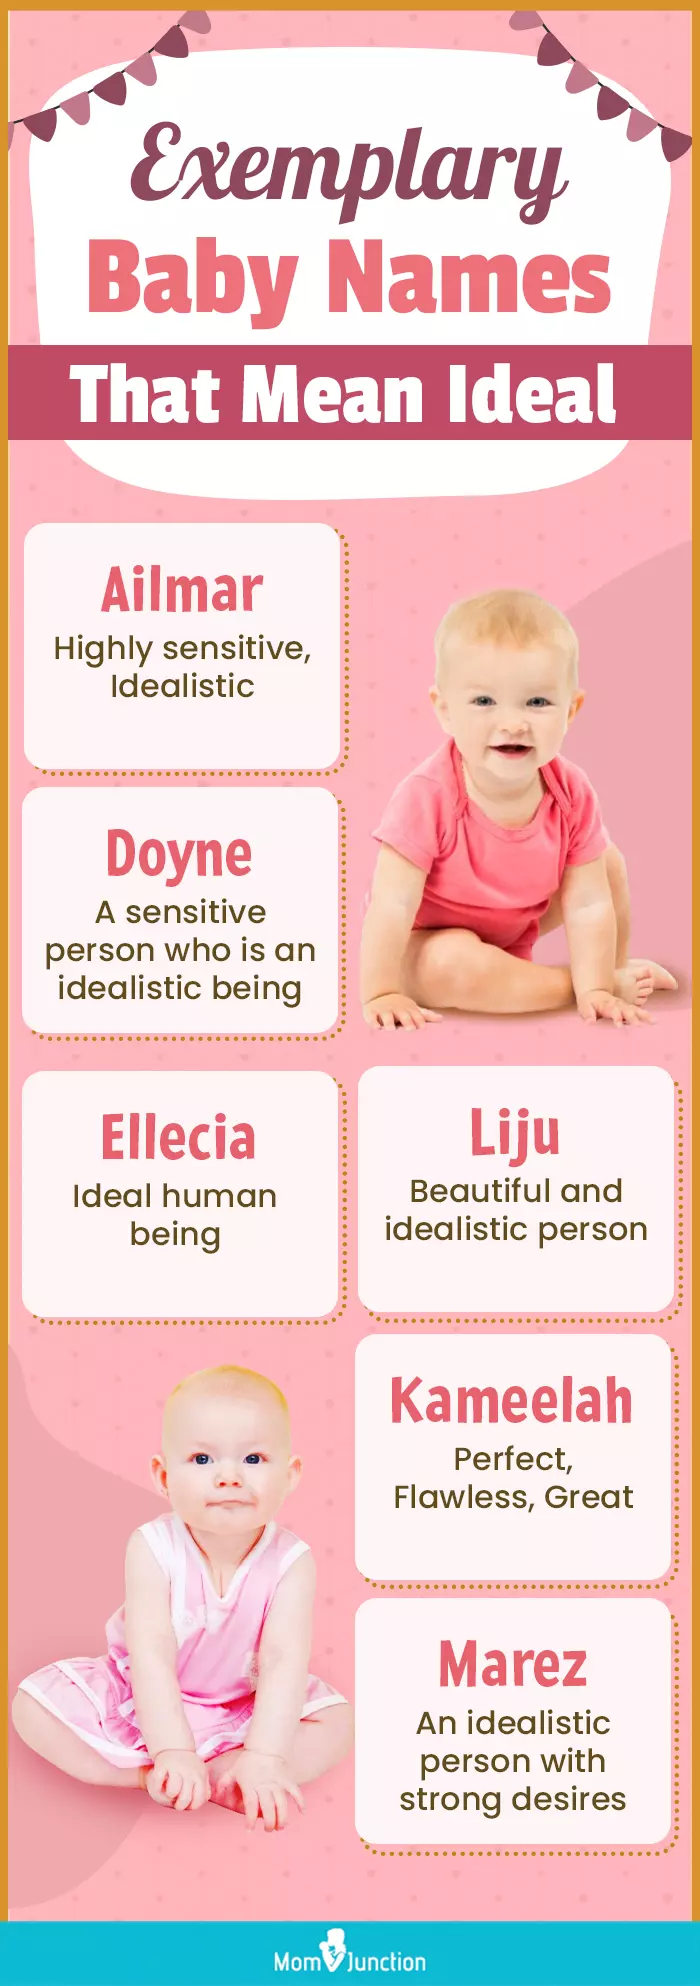 Exemplary Baby Names That Mean Ideal (infographic)